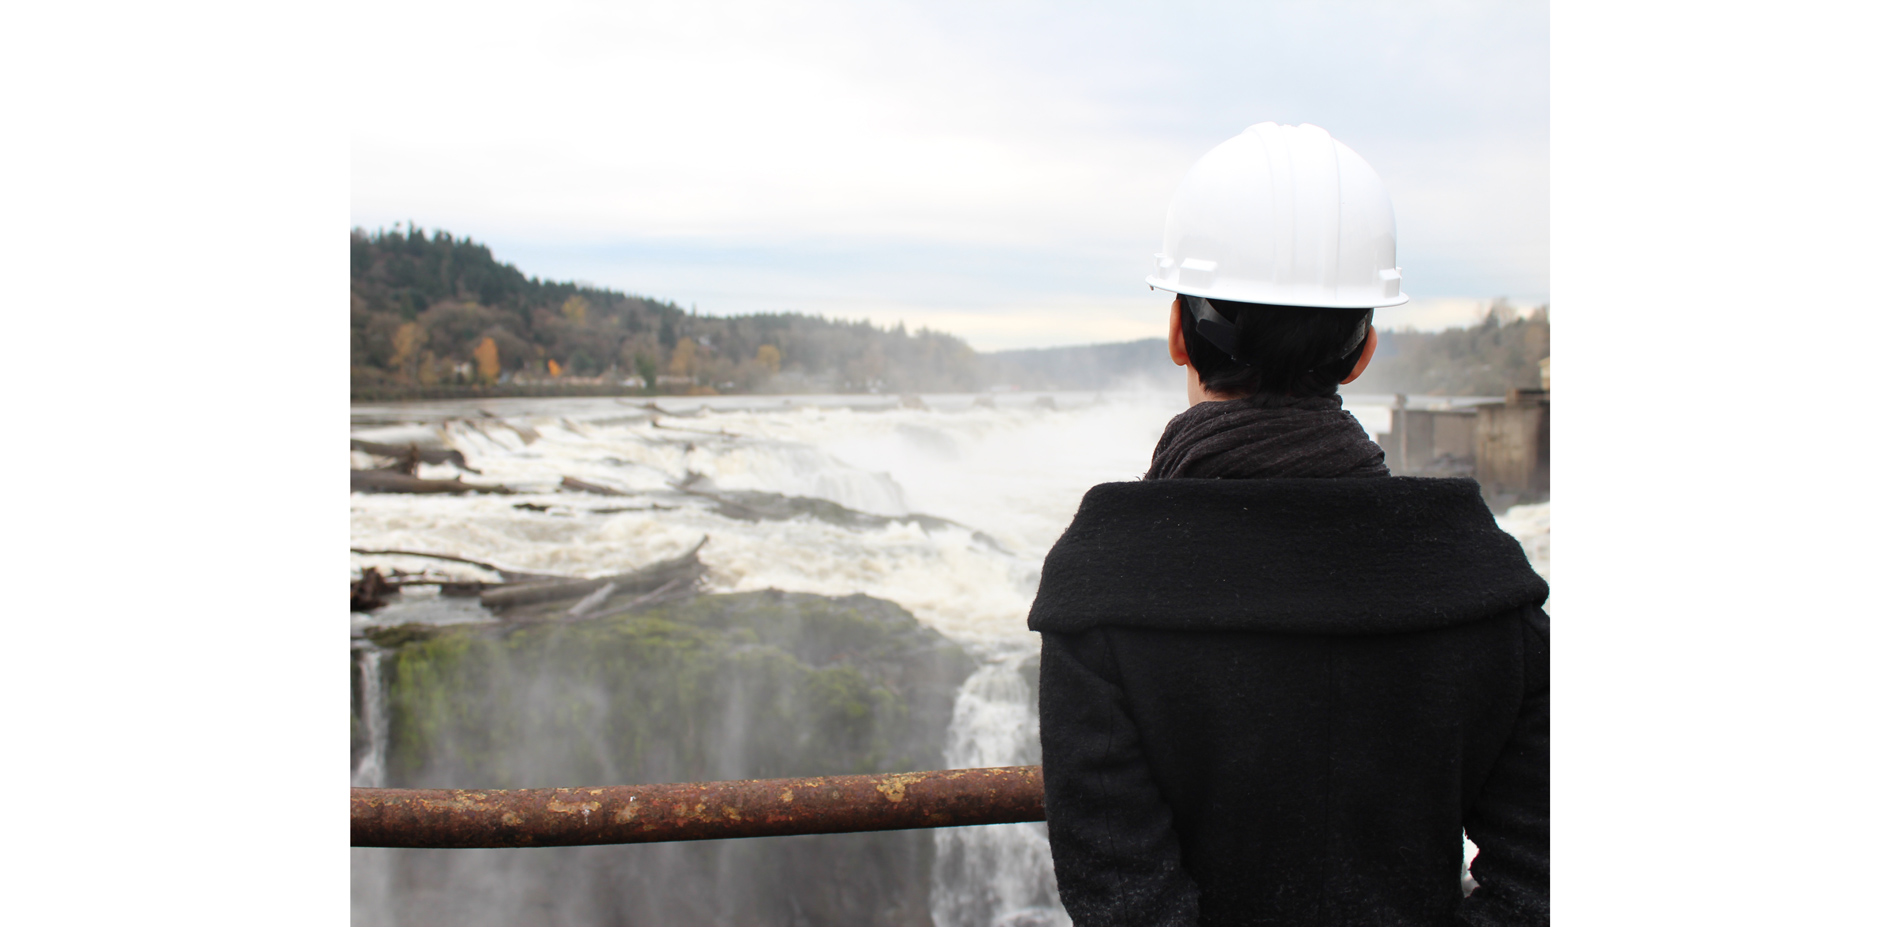 Willamette Falls Existing Conditions